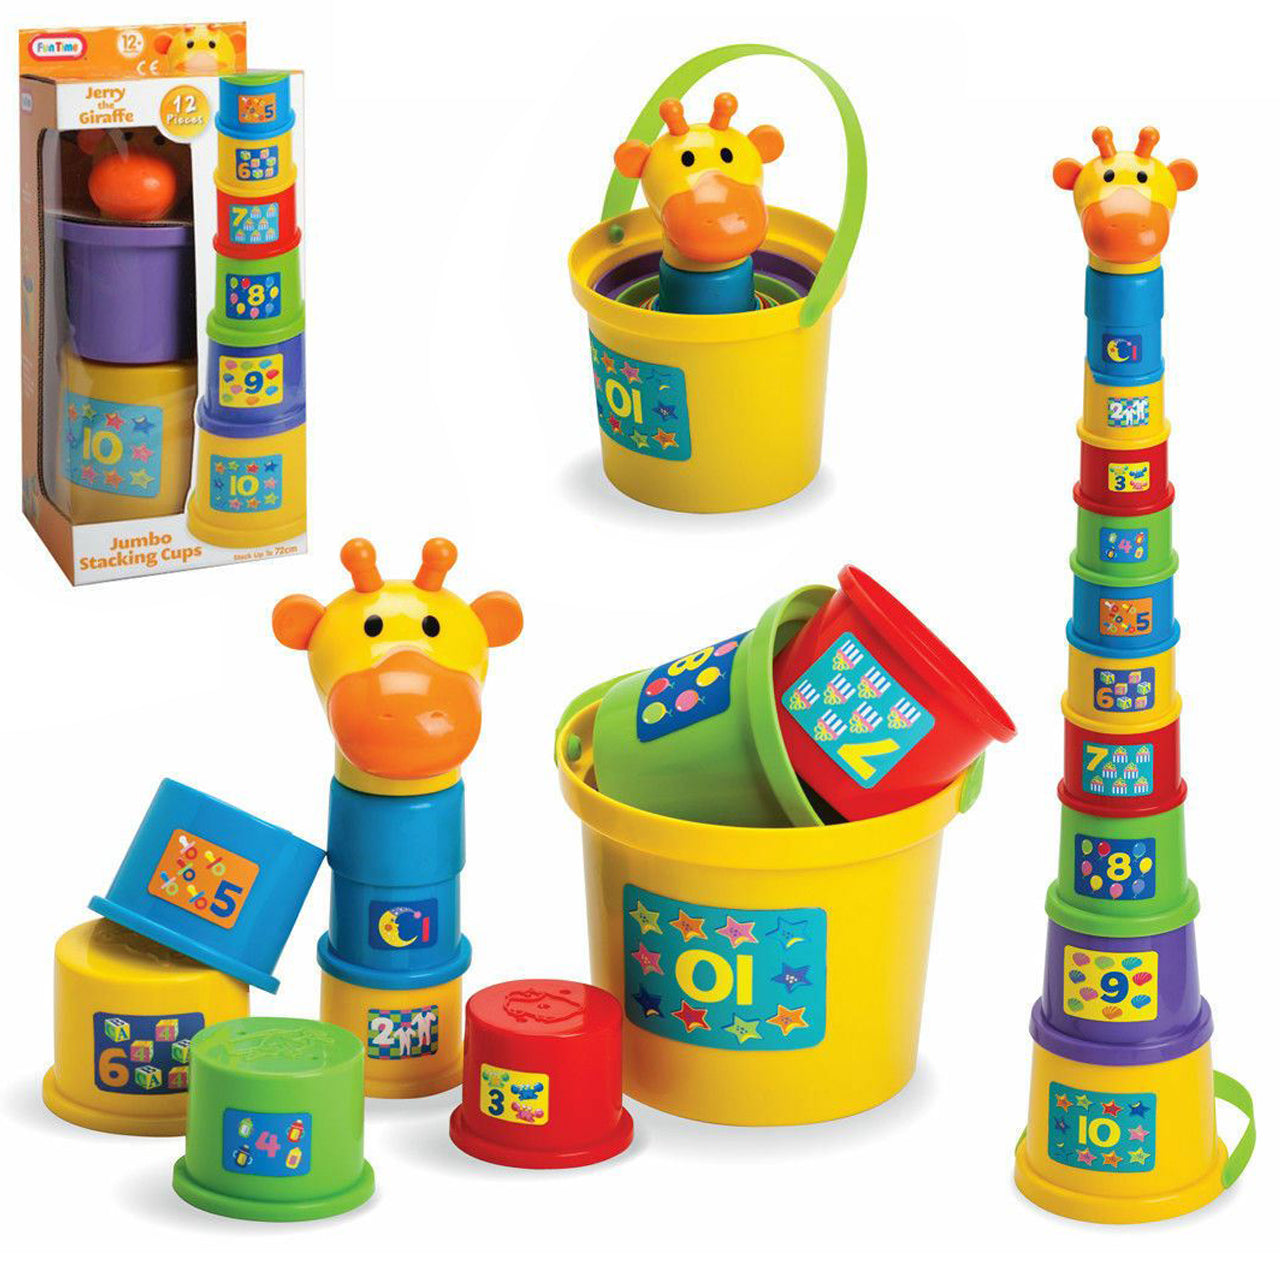 The Magic Toy Shop Stacking Cups Gerry the Giraffe Shape Sorting Jumbo Stacking Cups